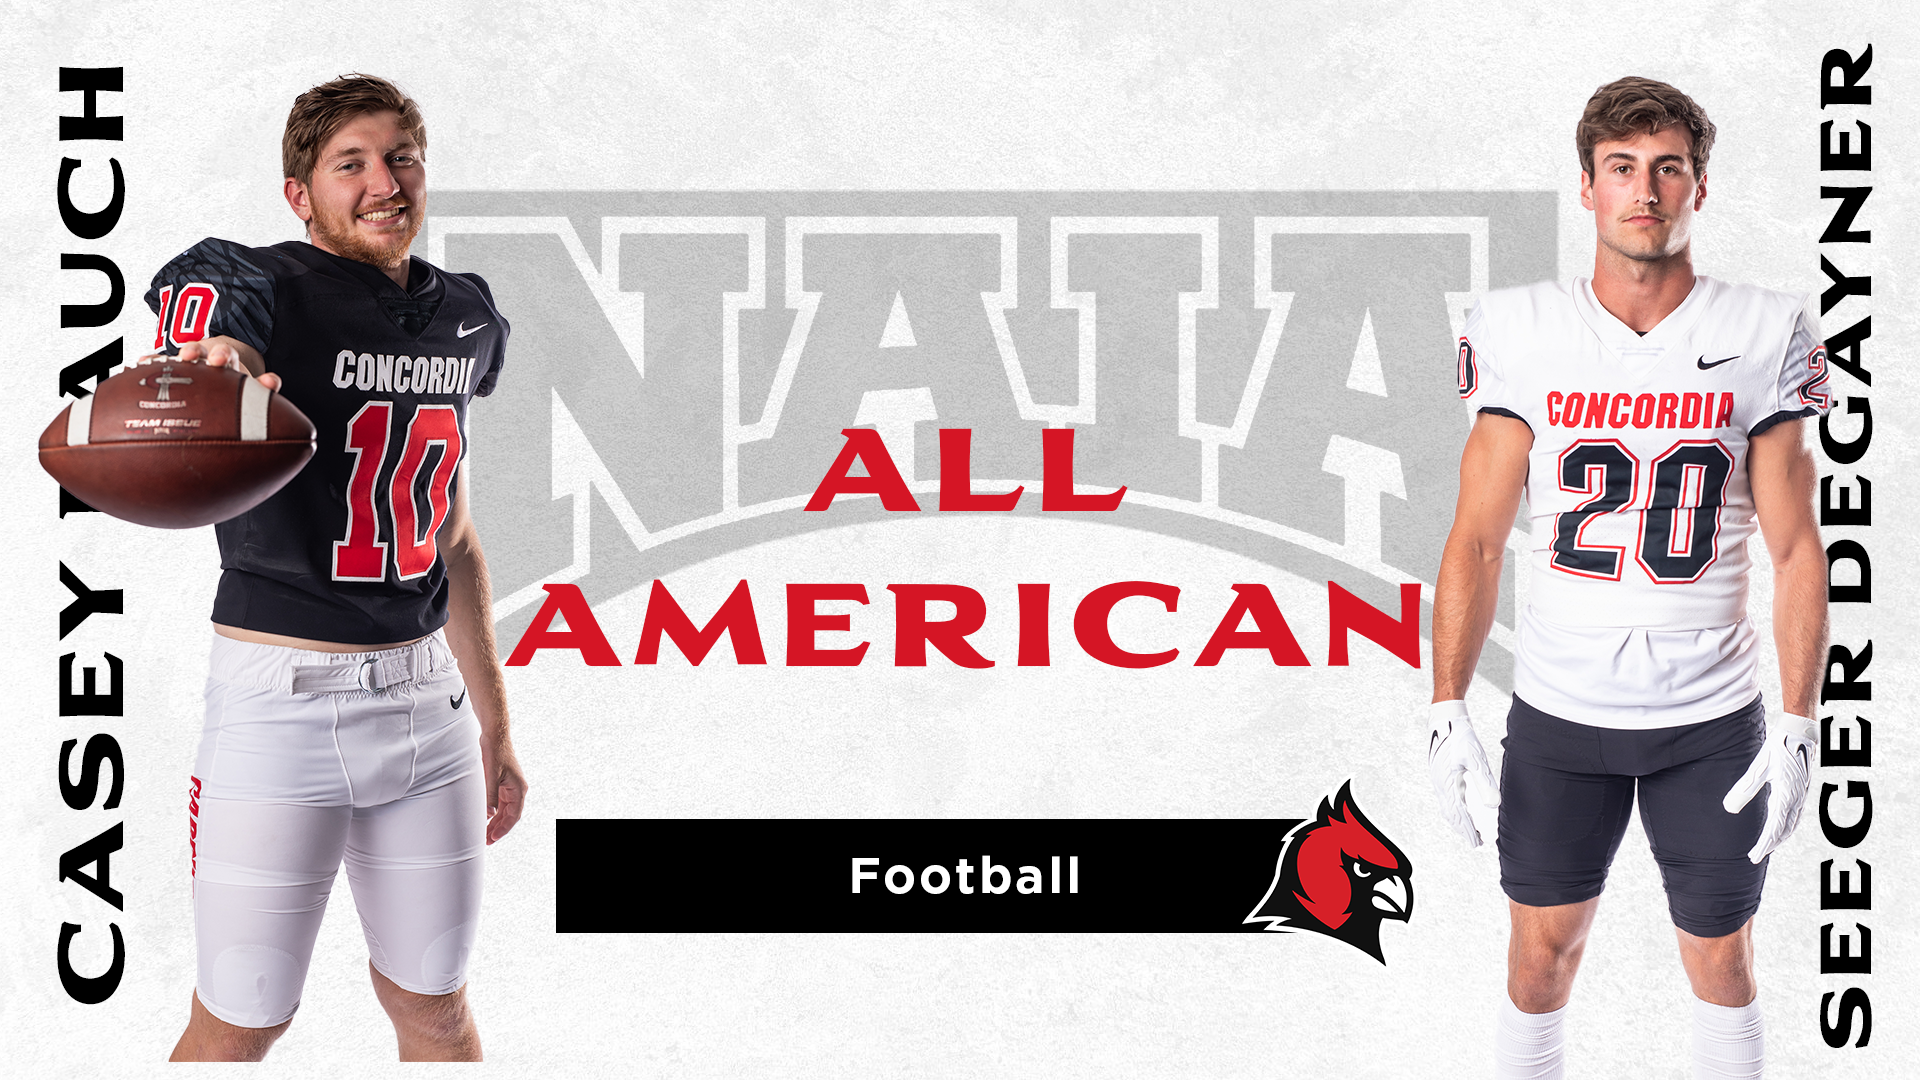 DeGayner and Rauch named to the AFCA/NAIA All-American teams